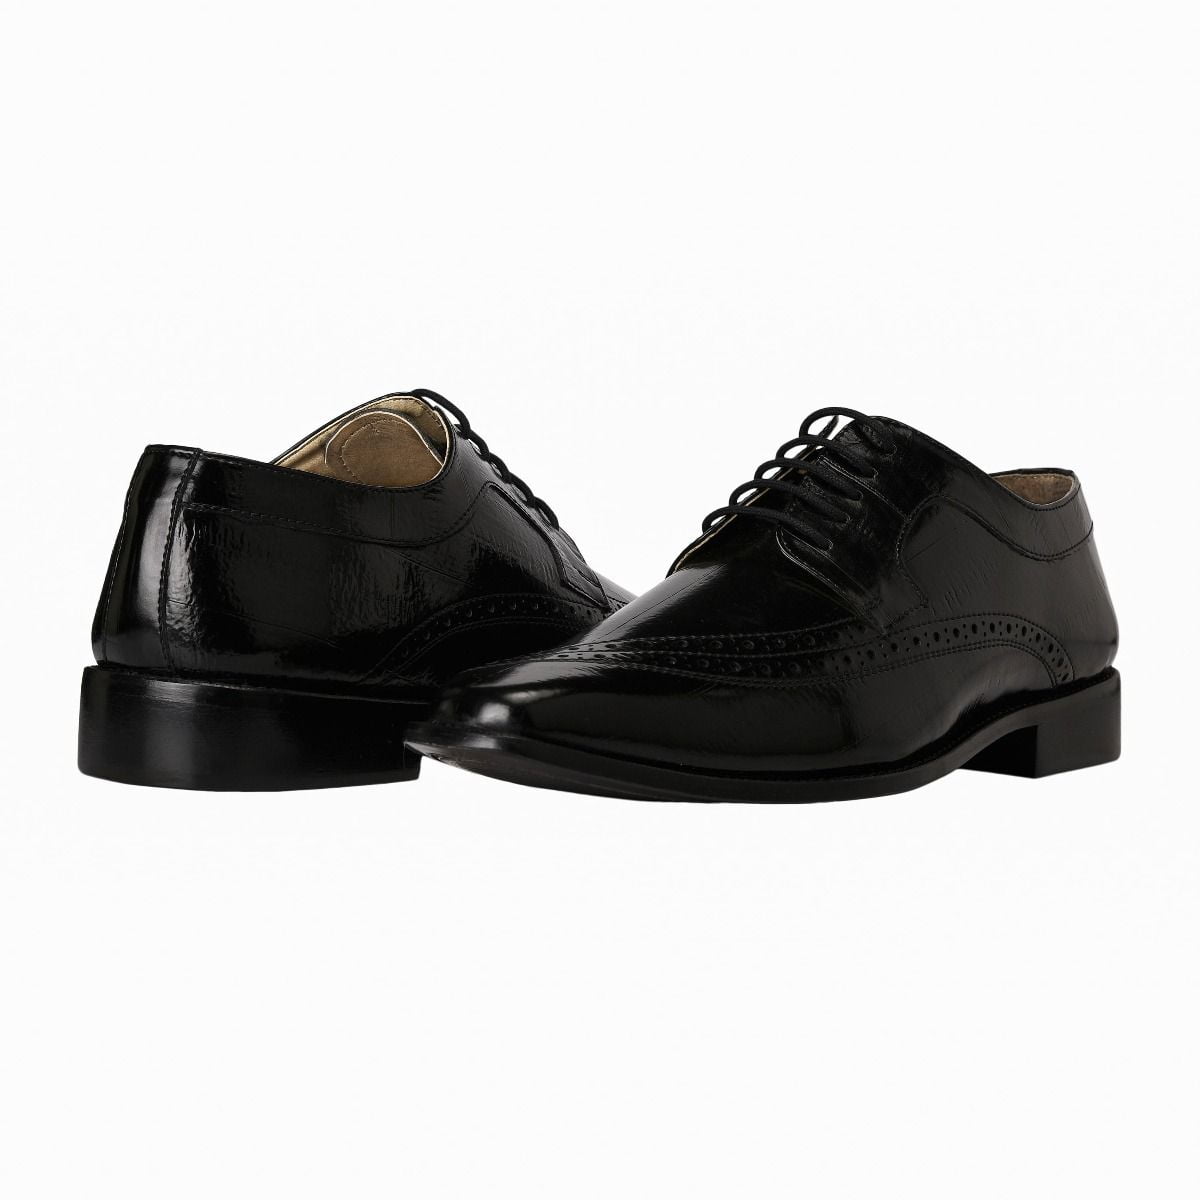 Camden Details about   LibertyZeno Men's EEL Print Manmade Leather Lace Up Closure Dress Shoes 